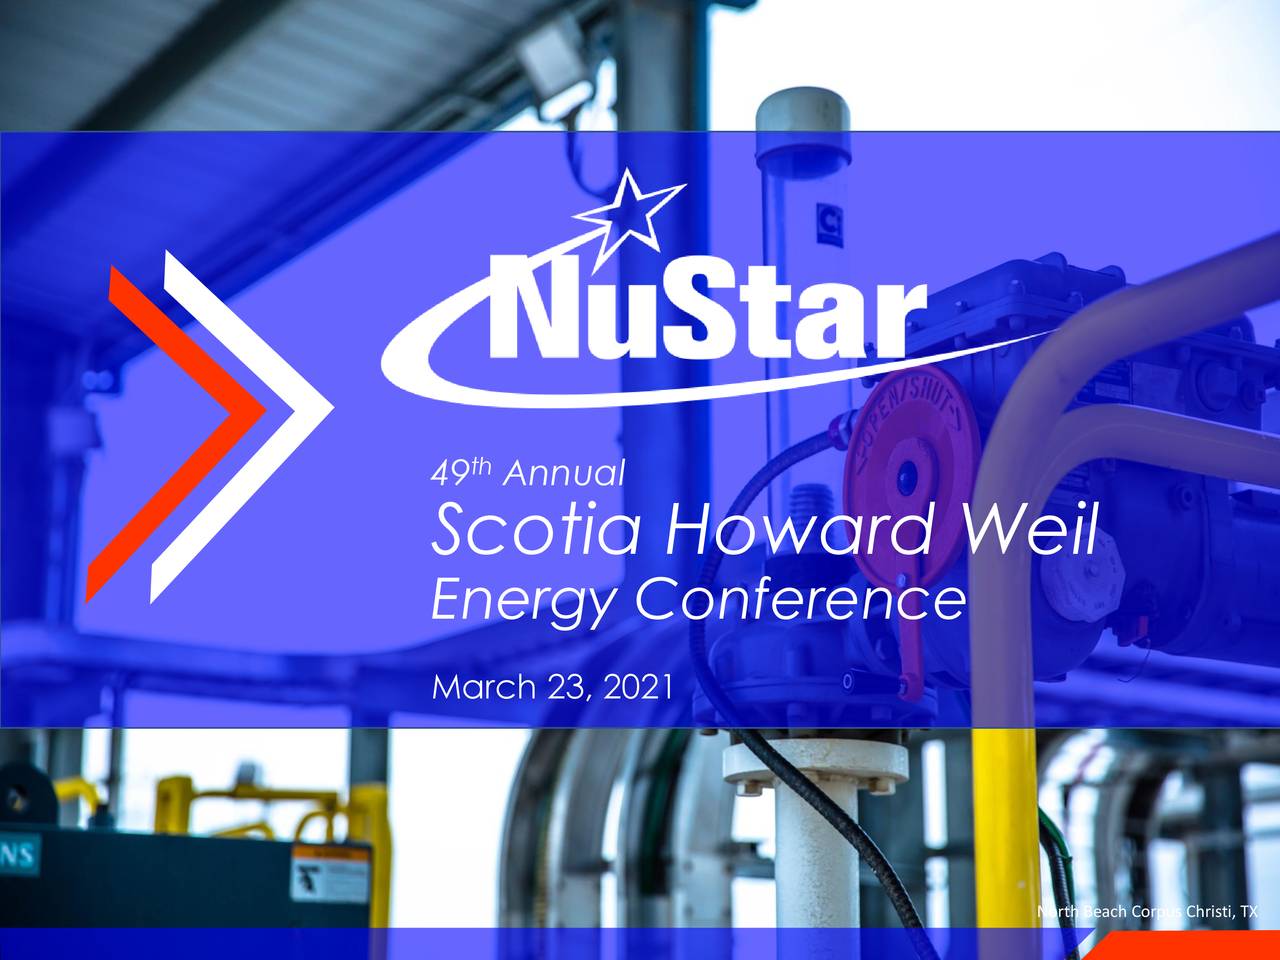 NuStar Energy (NS) Presents At 49th Annual Scotia Howard Weil Energy